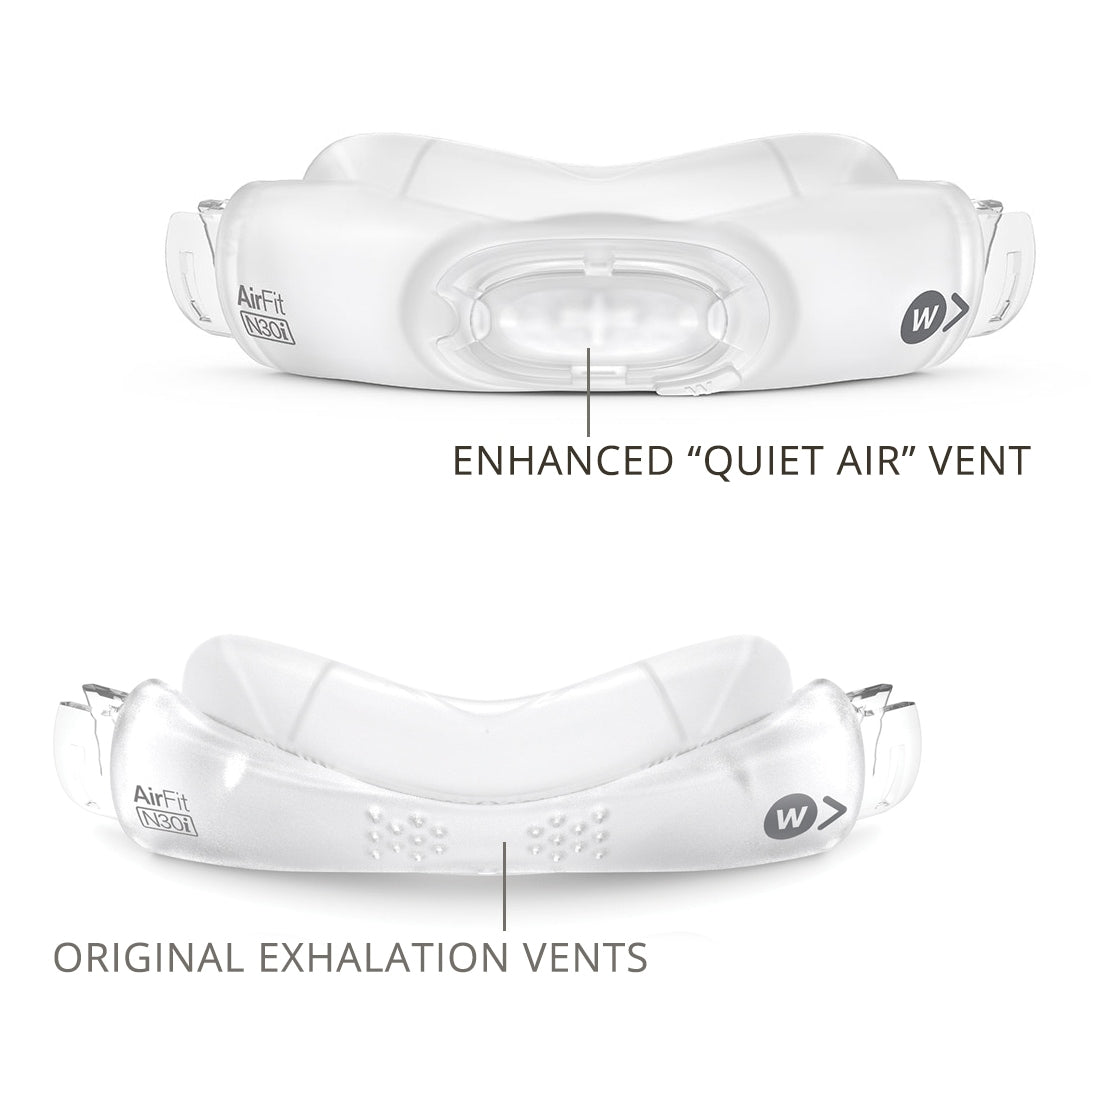 Cushions for the ResMed AirFit N30i.